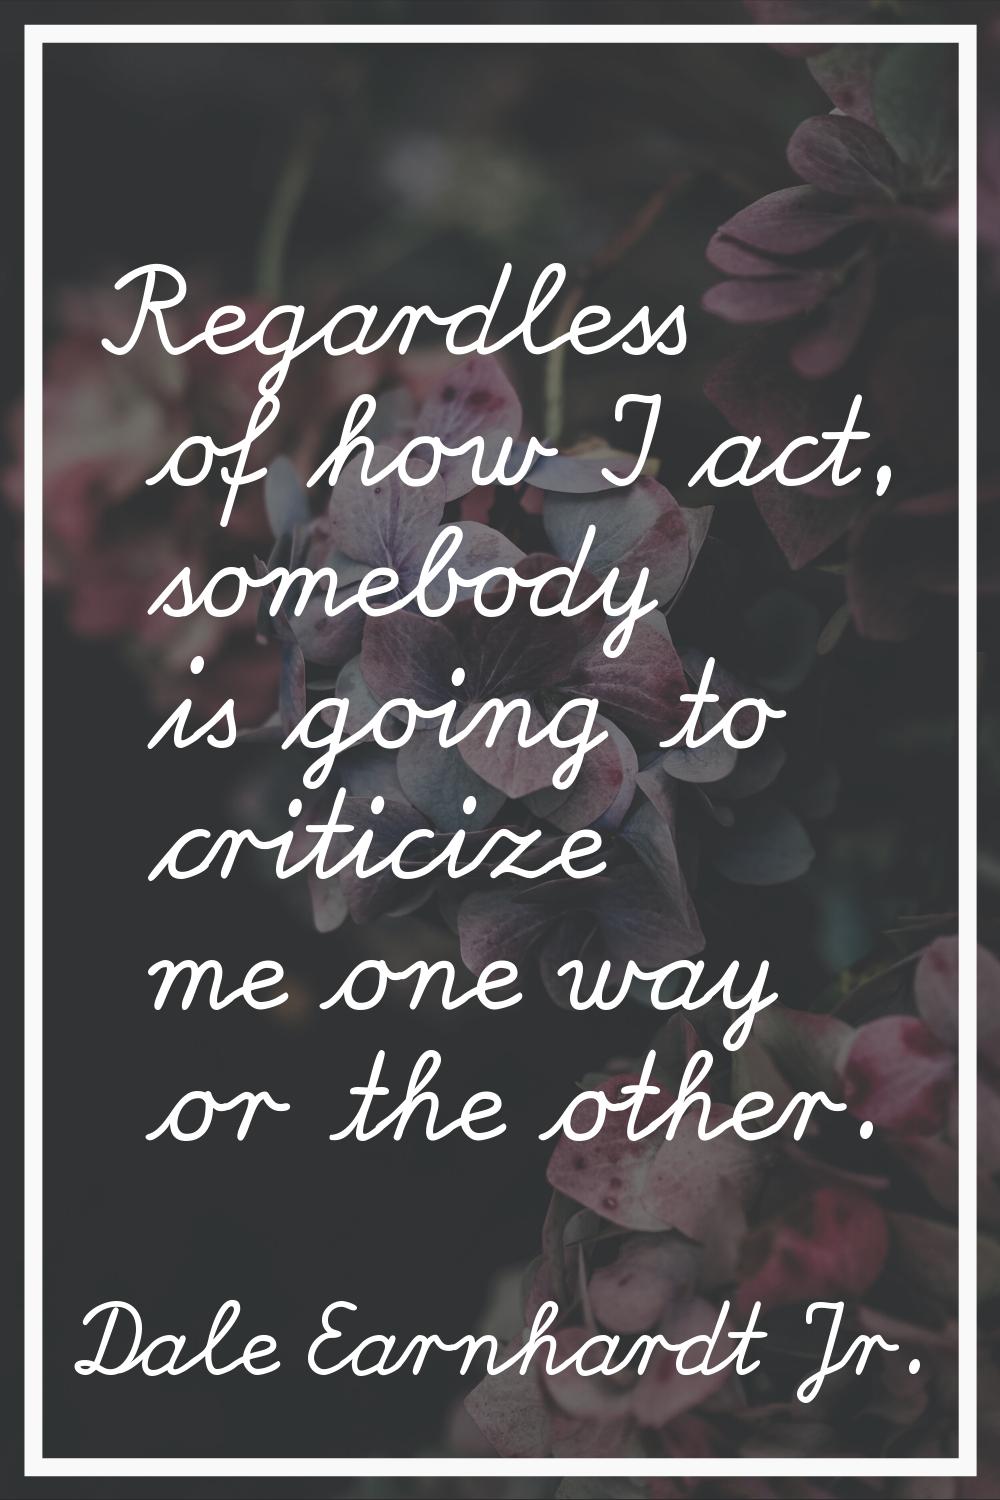 Regardless of how I act, somebody is going to criticize me one way or the other.